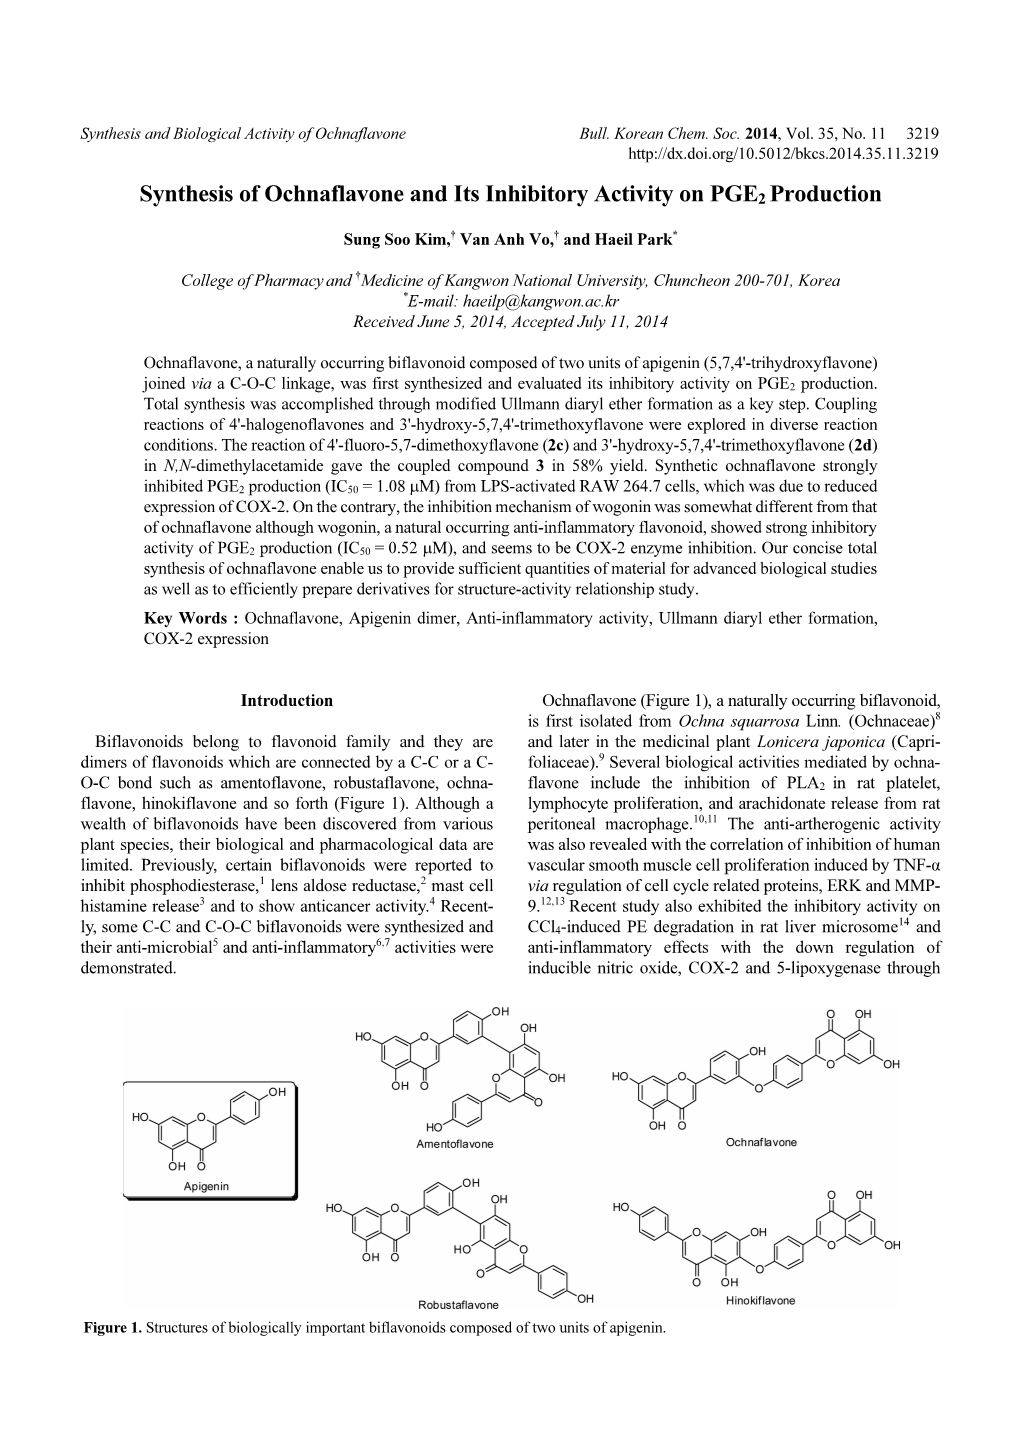 Synthesis of Ochnaflavone and Its Inhibitory Activity on PGE 2